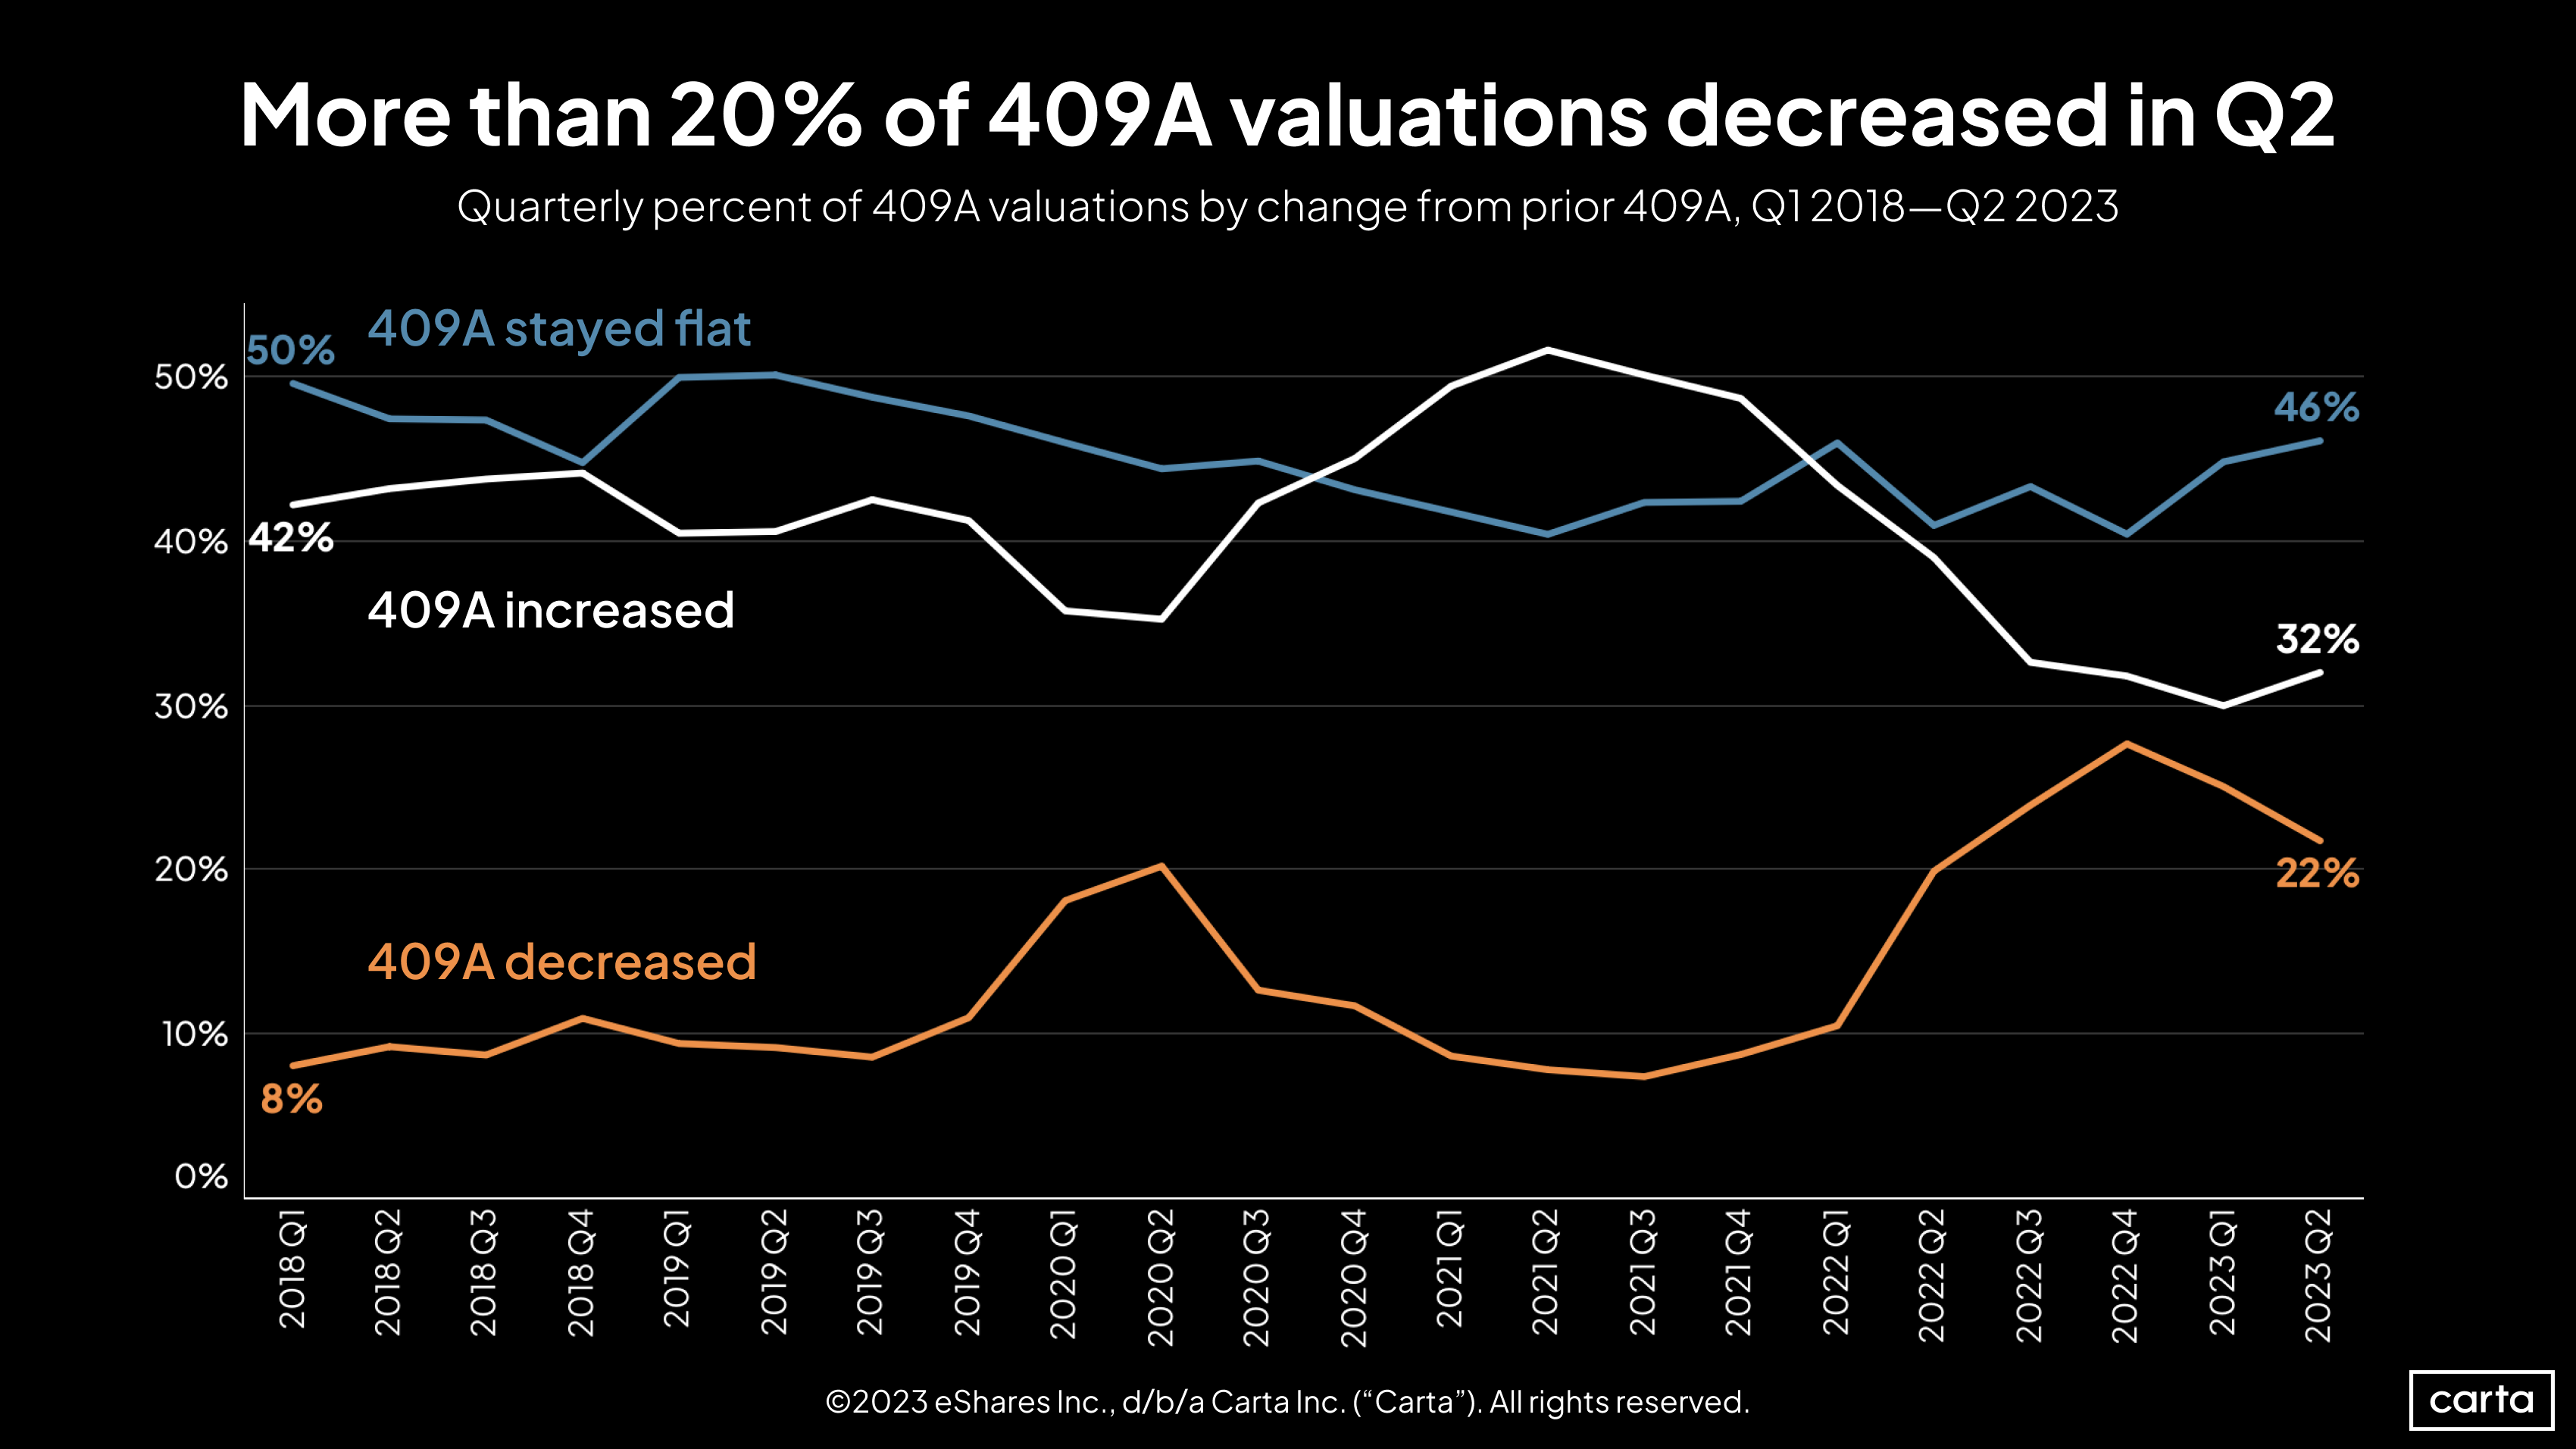 Quarterly percent of 409 A valuations by change from prior 409A, Q1 2018 - Q2 2023